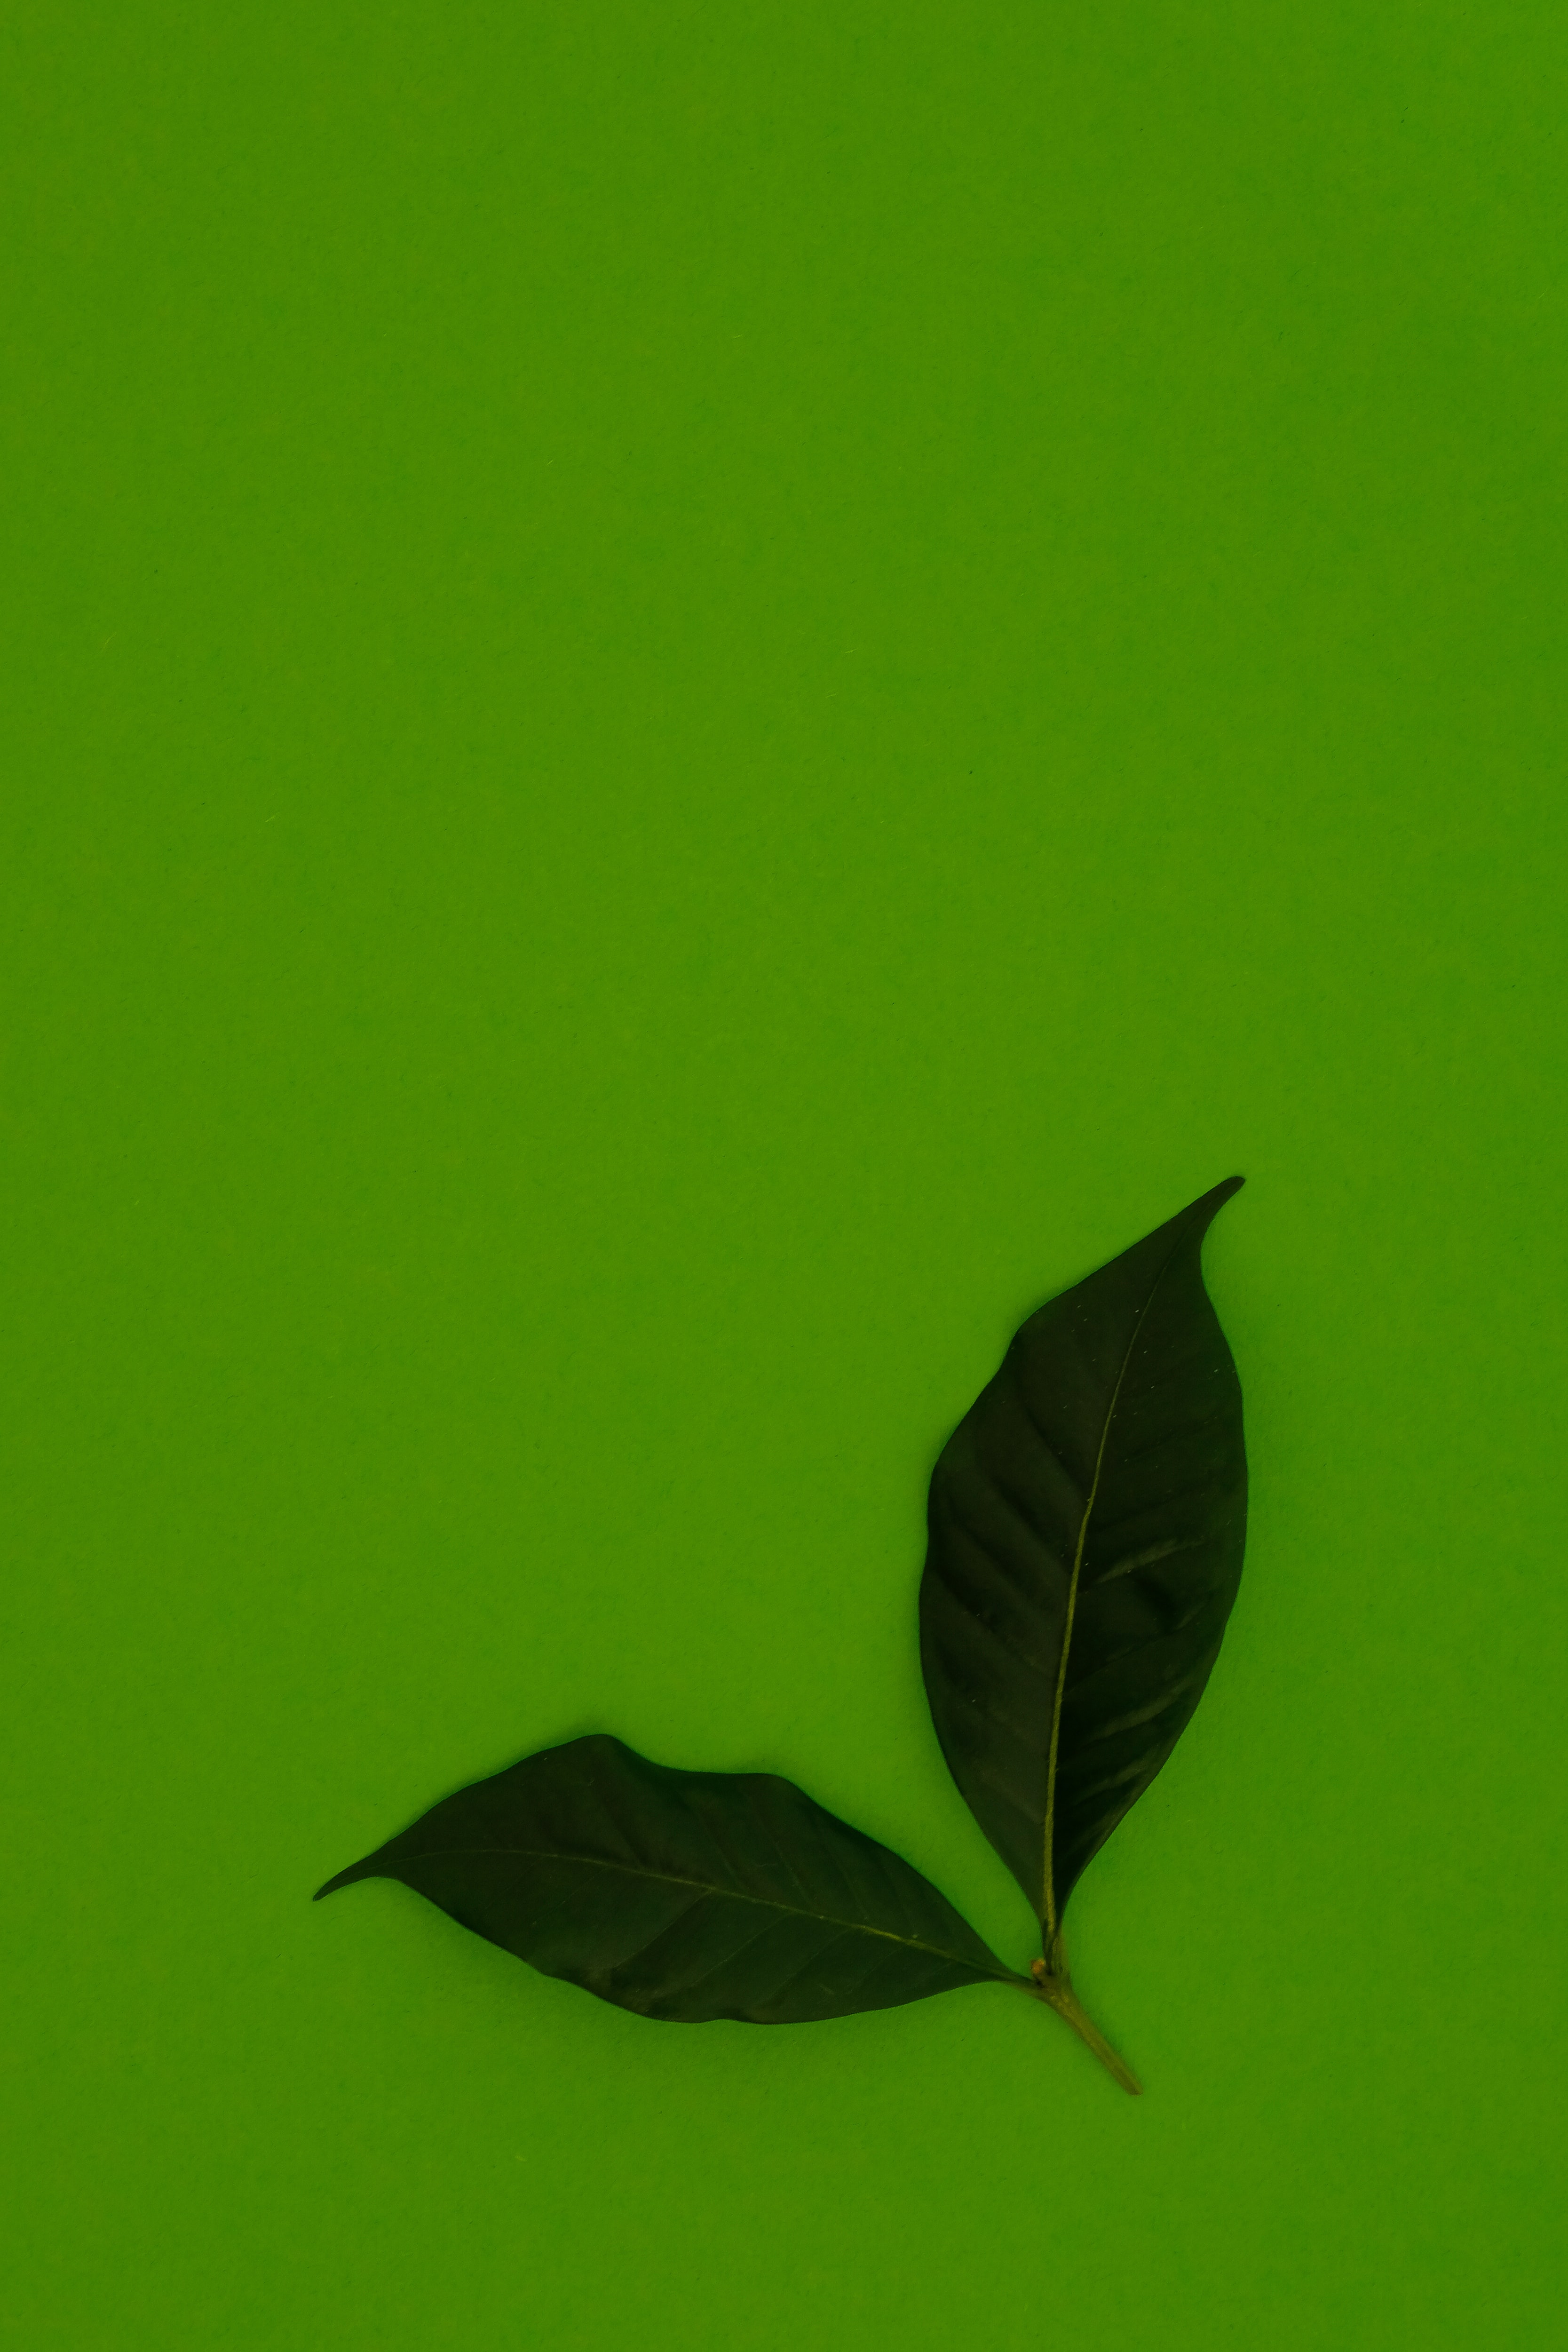 miscellanea, background, leaves, green, miscellaneous wallpaper for mobile